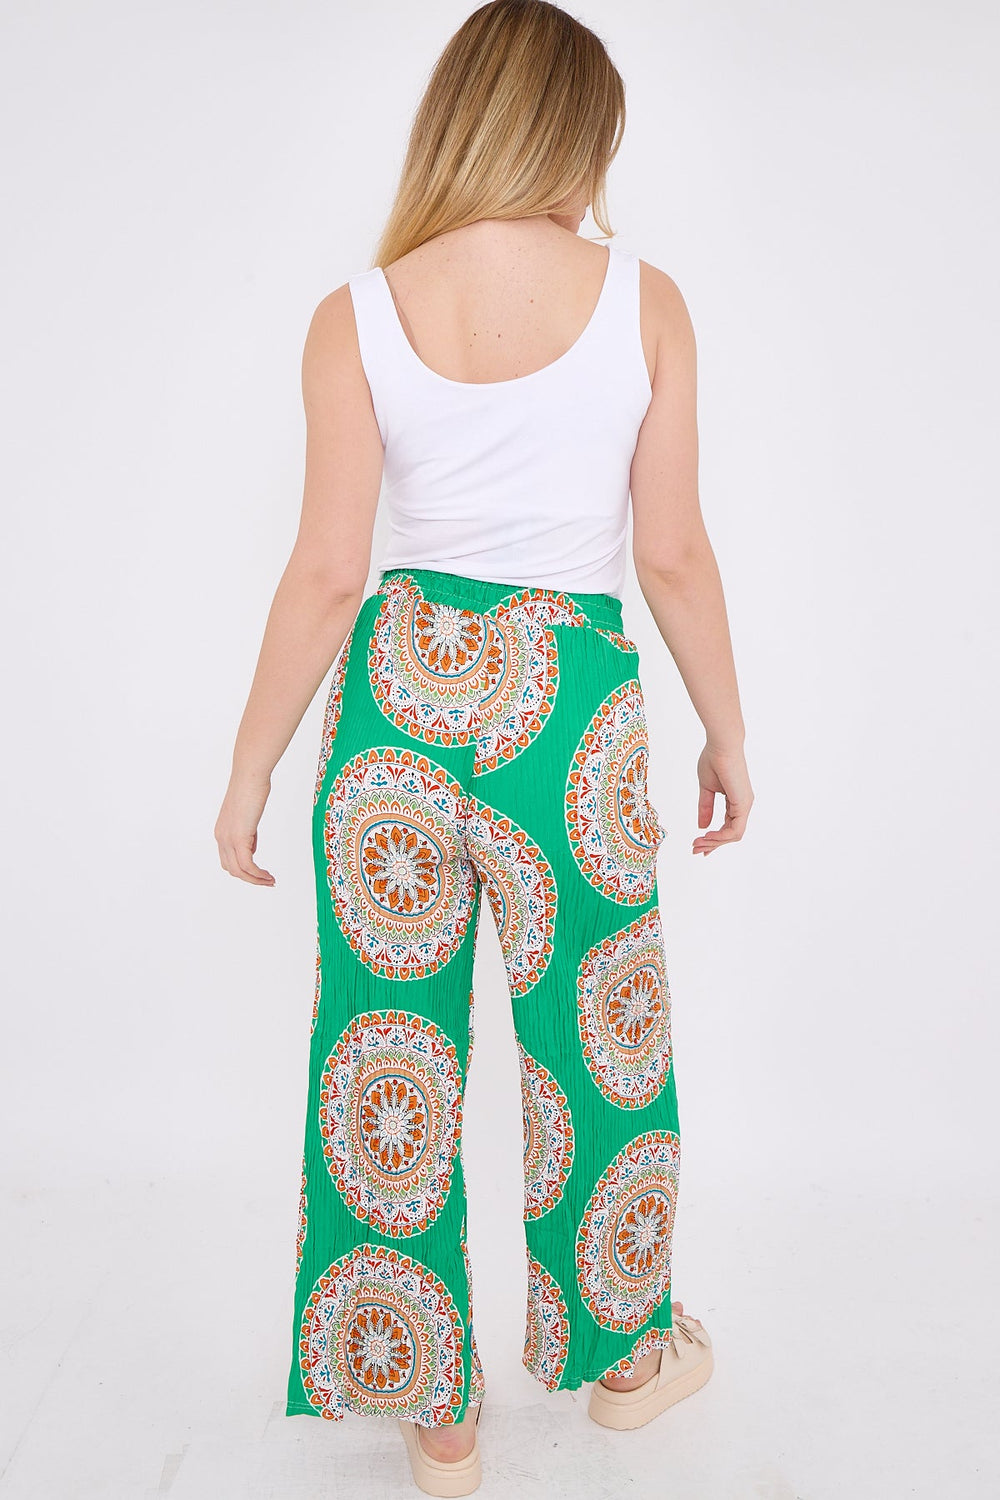 CIRCLE PRINT PLEATED TROUSER(MIXED COLOUR PACK) (8322326233336) (8449266581752)